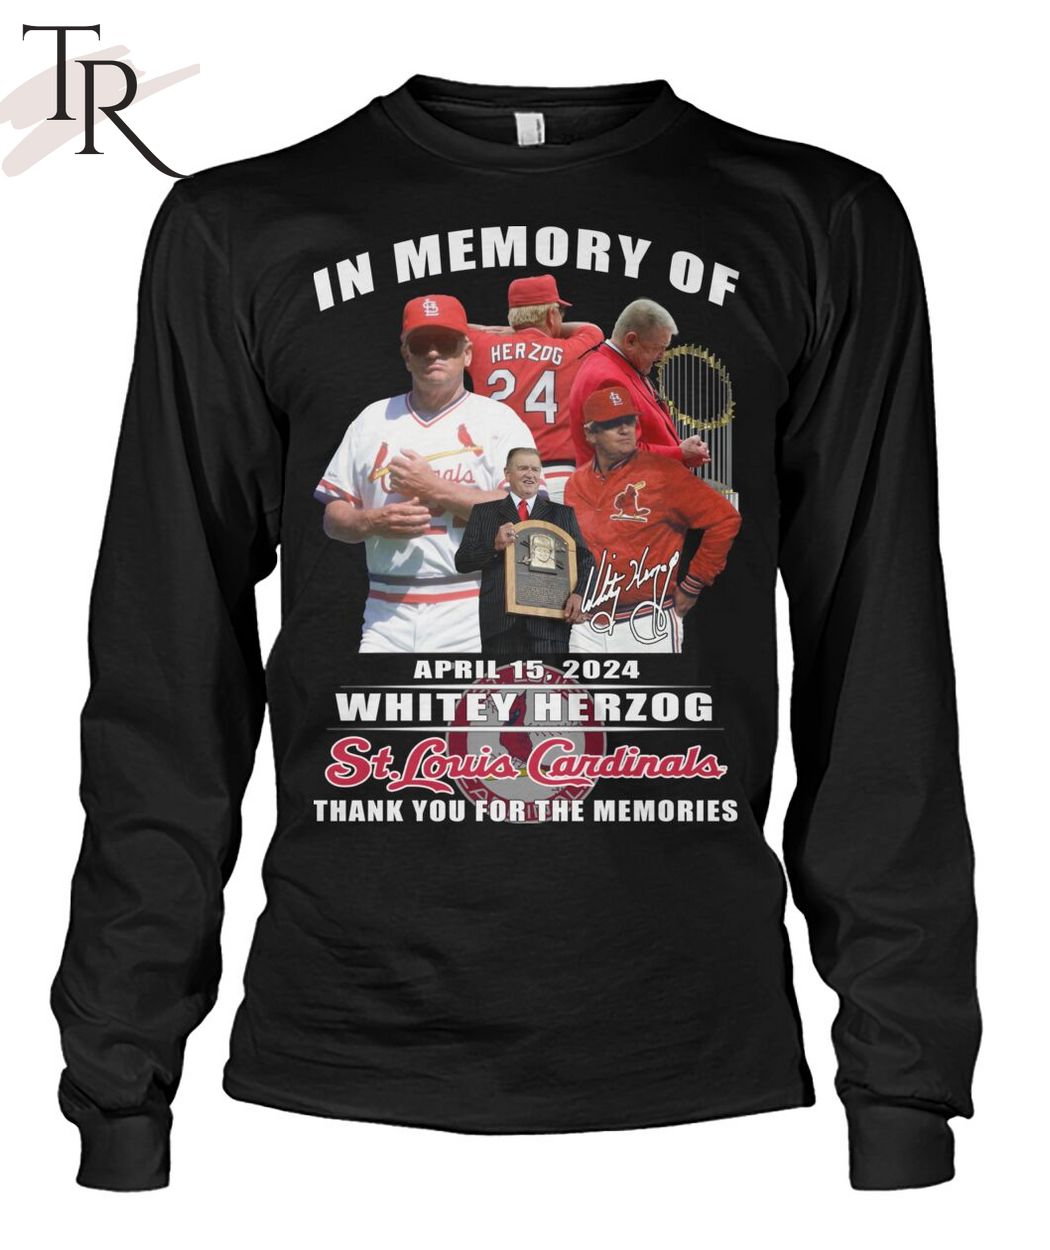 In Memory Of April 15, 2024 Whitey Herzog St. Louis Cardinals Thank You For The Memories T-Shirt